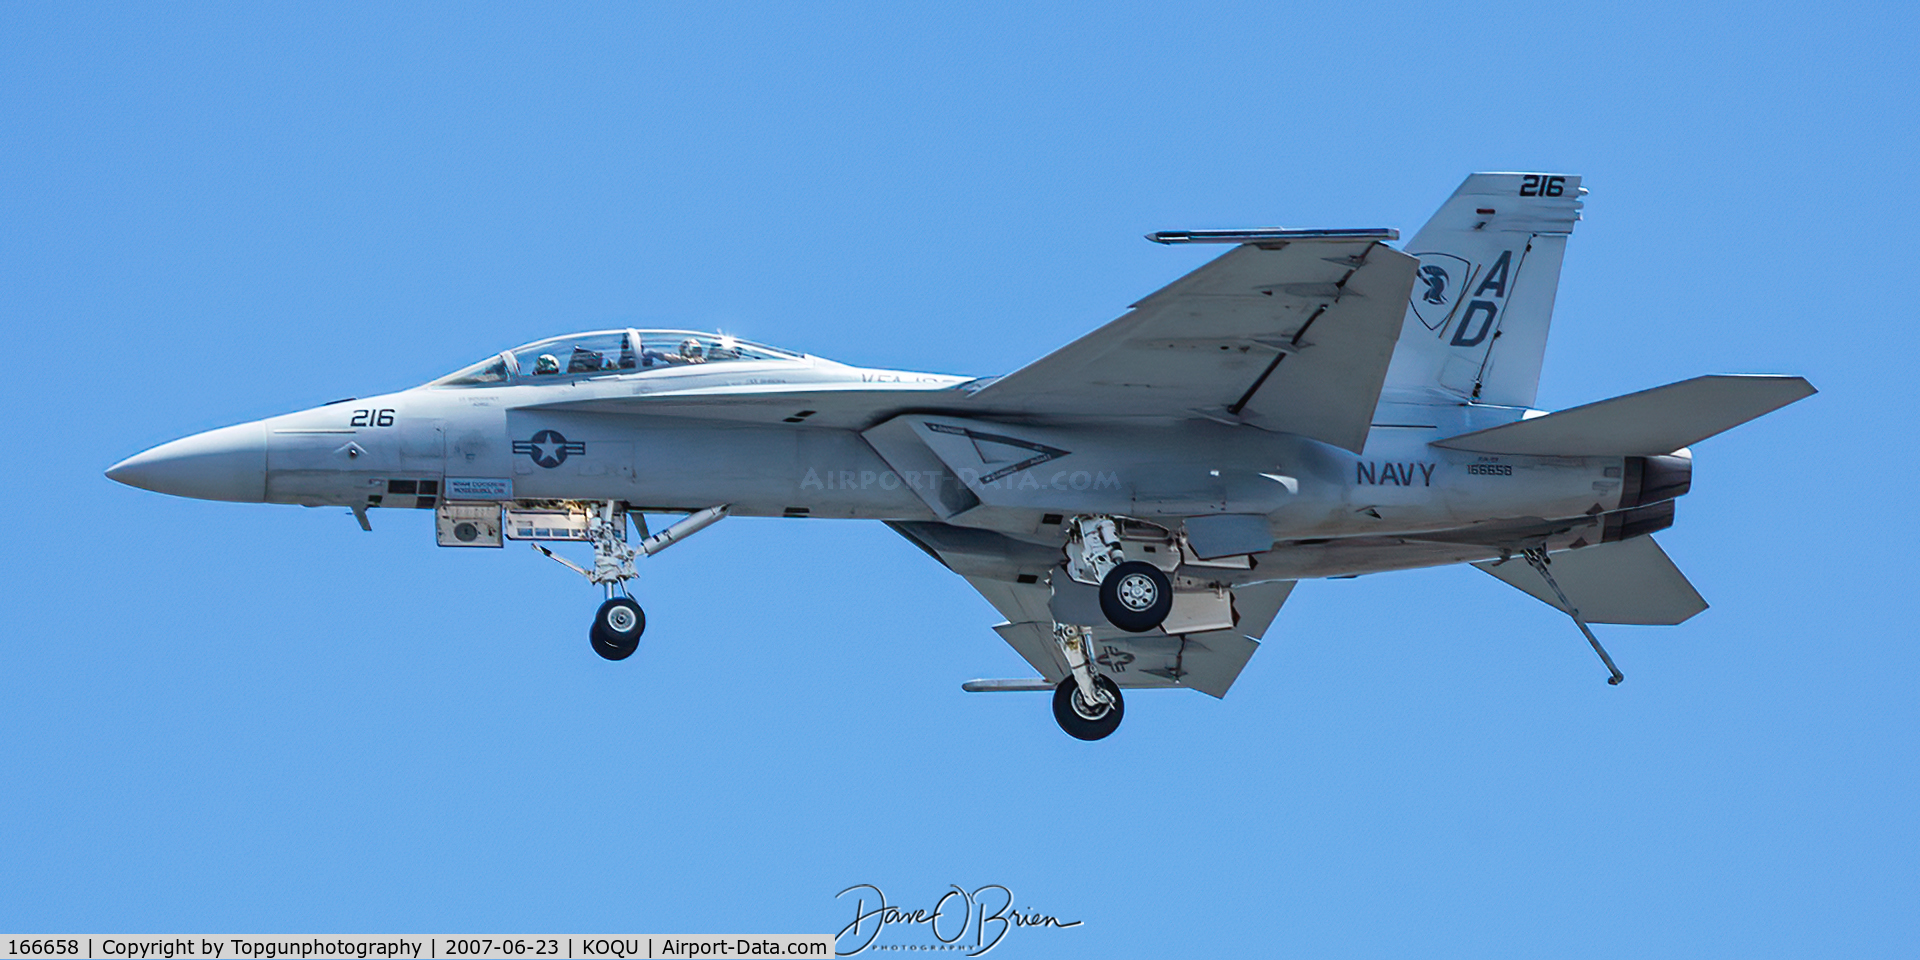 166658, Boeing F/A-18F Super Hornet C/N F136, Dirty Pass for the Super Hornet demo